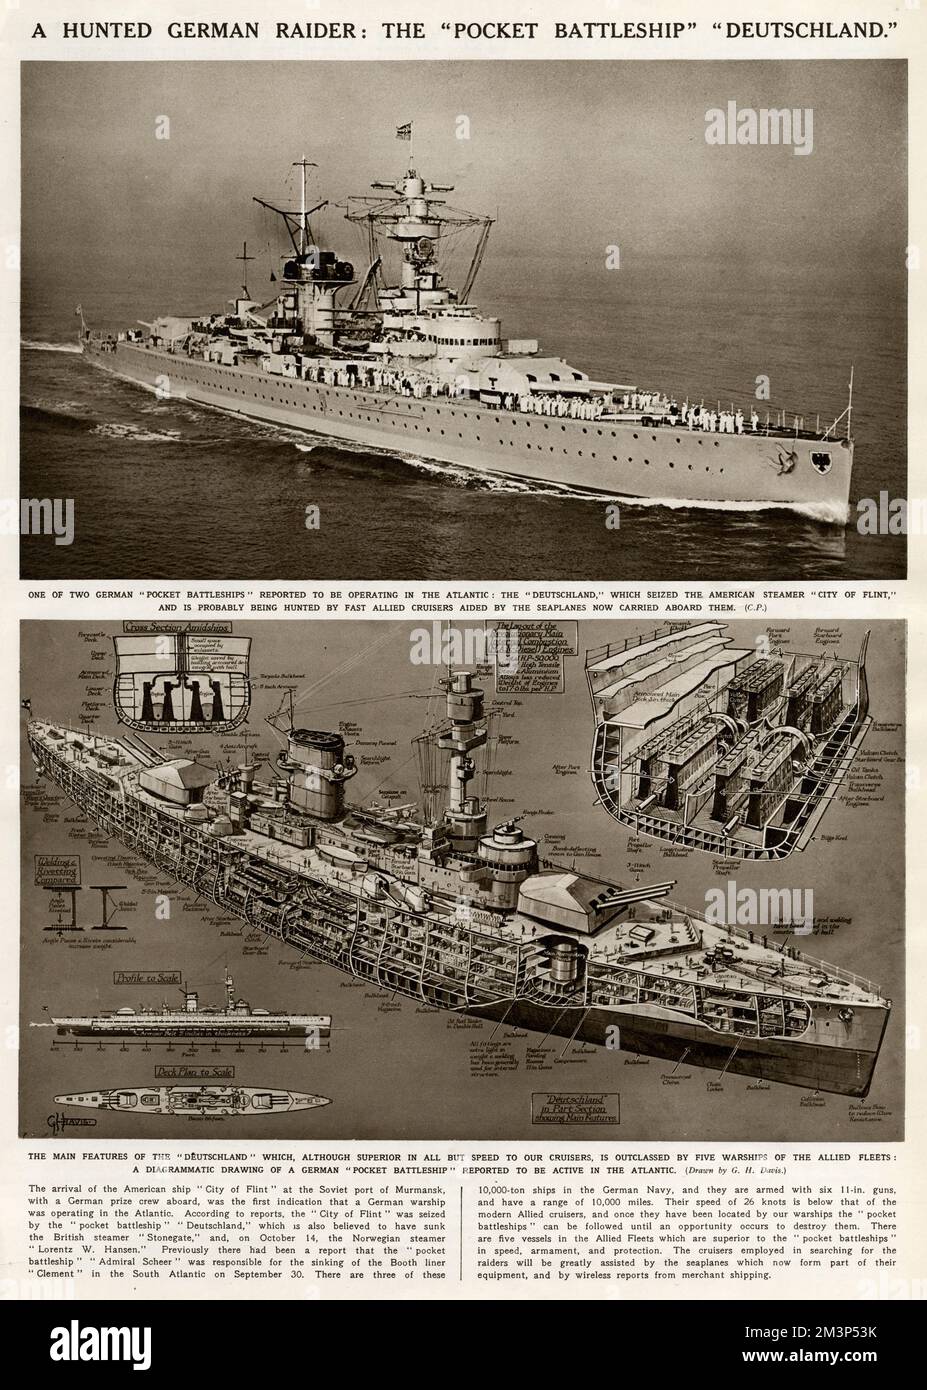 A hunted German raider believed to be active in the Atlantic: the pocket battleship Deutschland.  A photograph (above), and a cross-section drawing (below).       Date: 1939 Stock Photo